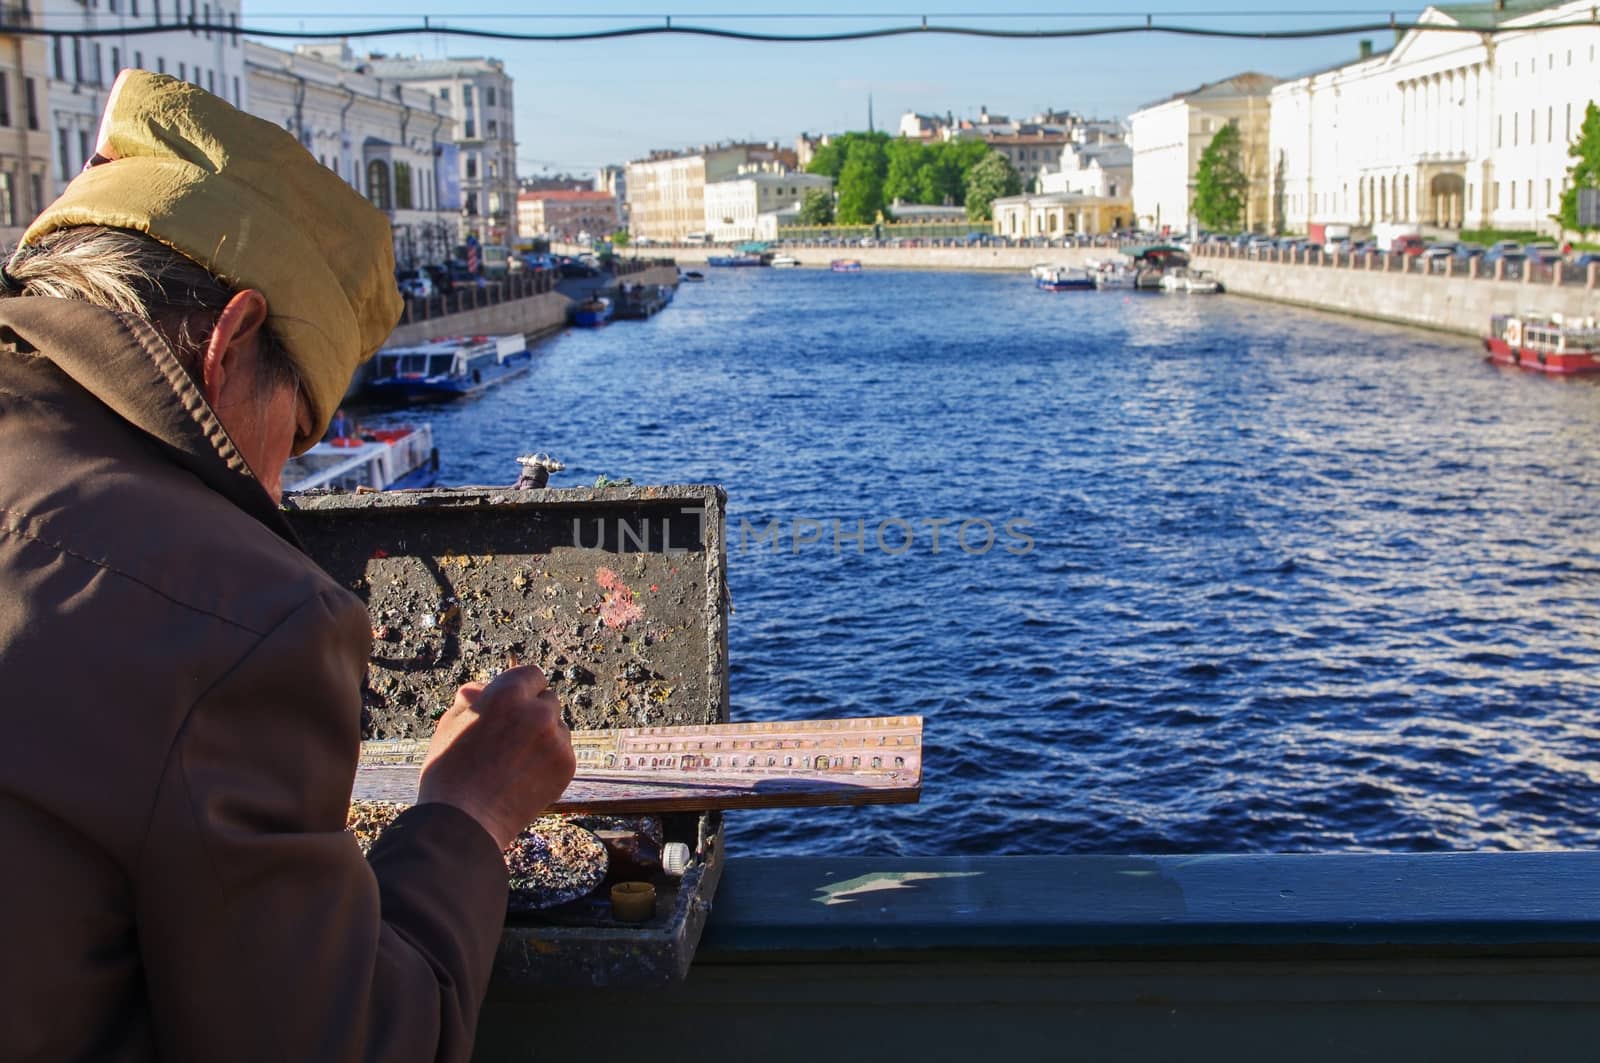 St. Petersburg, Russia - May 22, 2014: a street artist paints river landscape on the bridge over the Neva River.